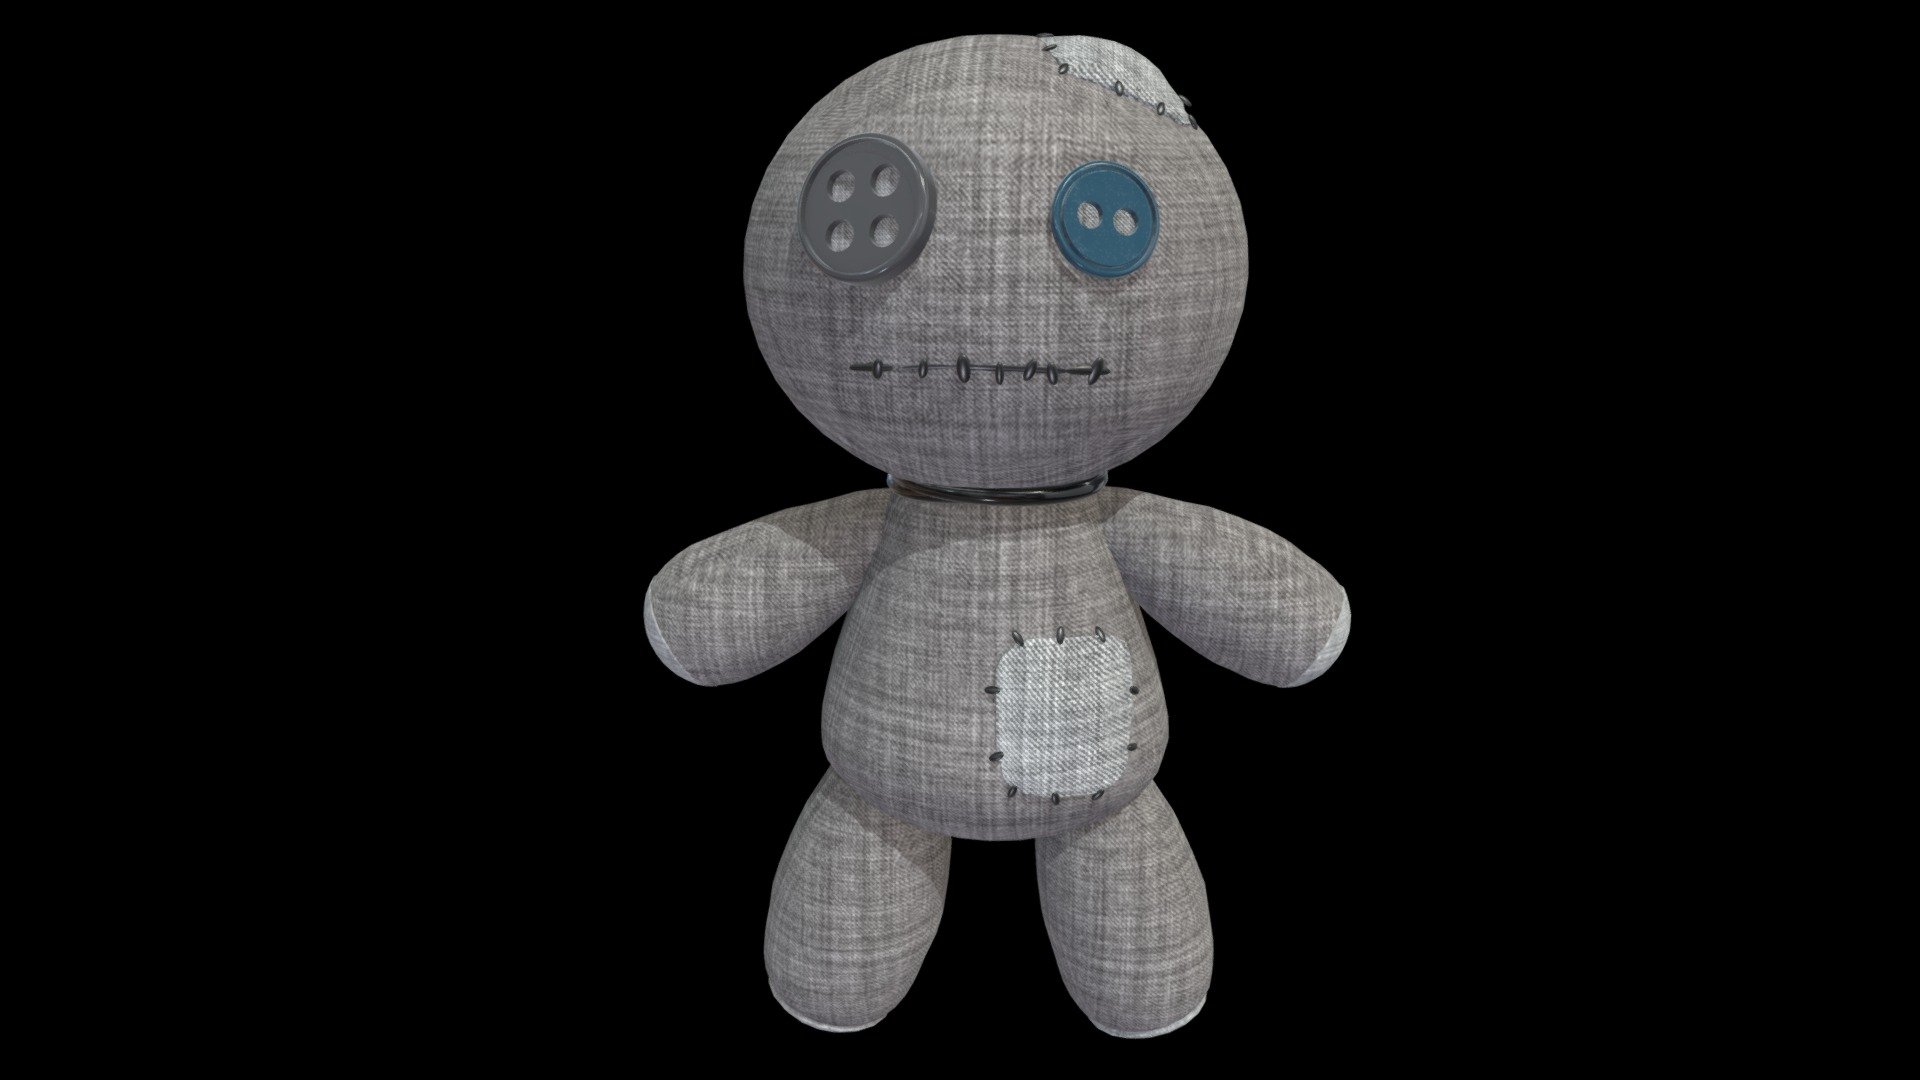 A cute little voodoo doll I modelled in Maya and then took into Substance Painter to texture 3d model